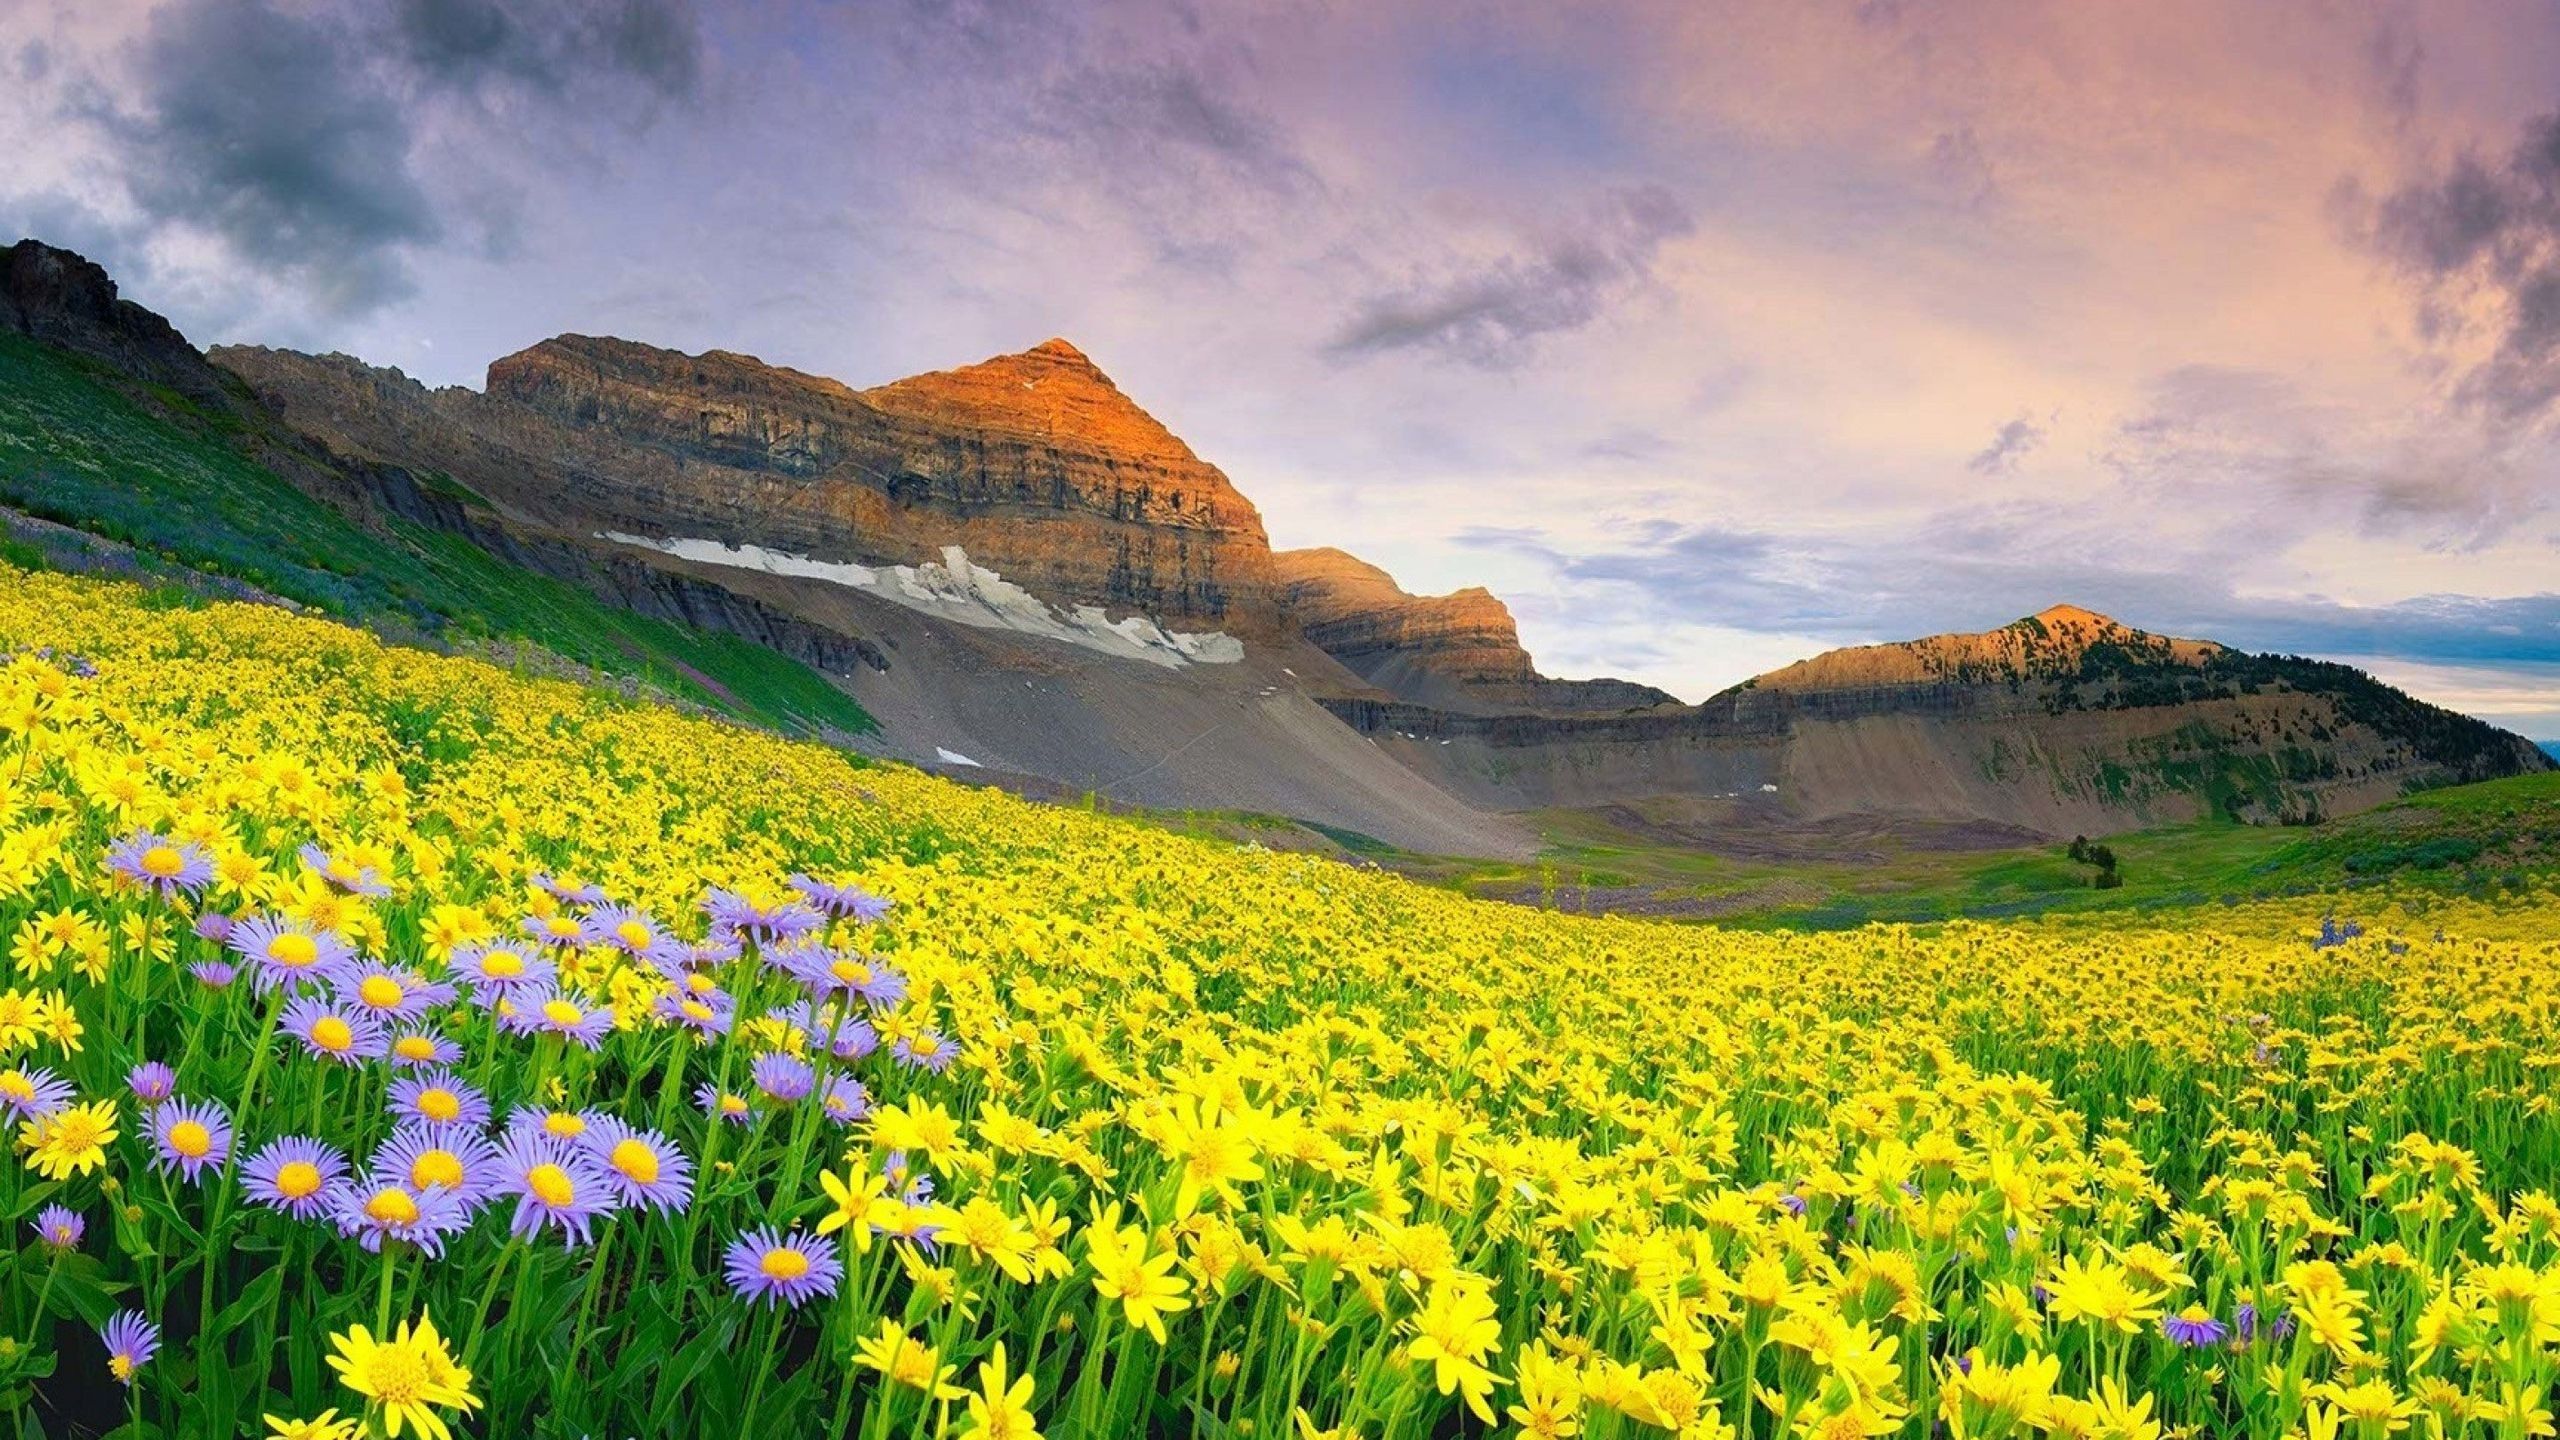 Best 43+ Valley of Flowers Wallpapers on HipWallpapers